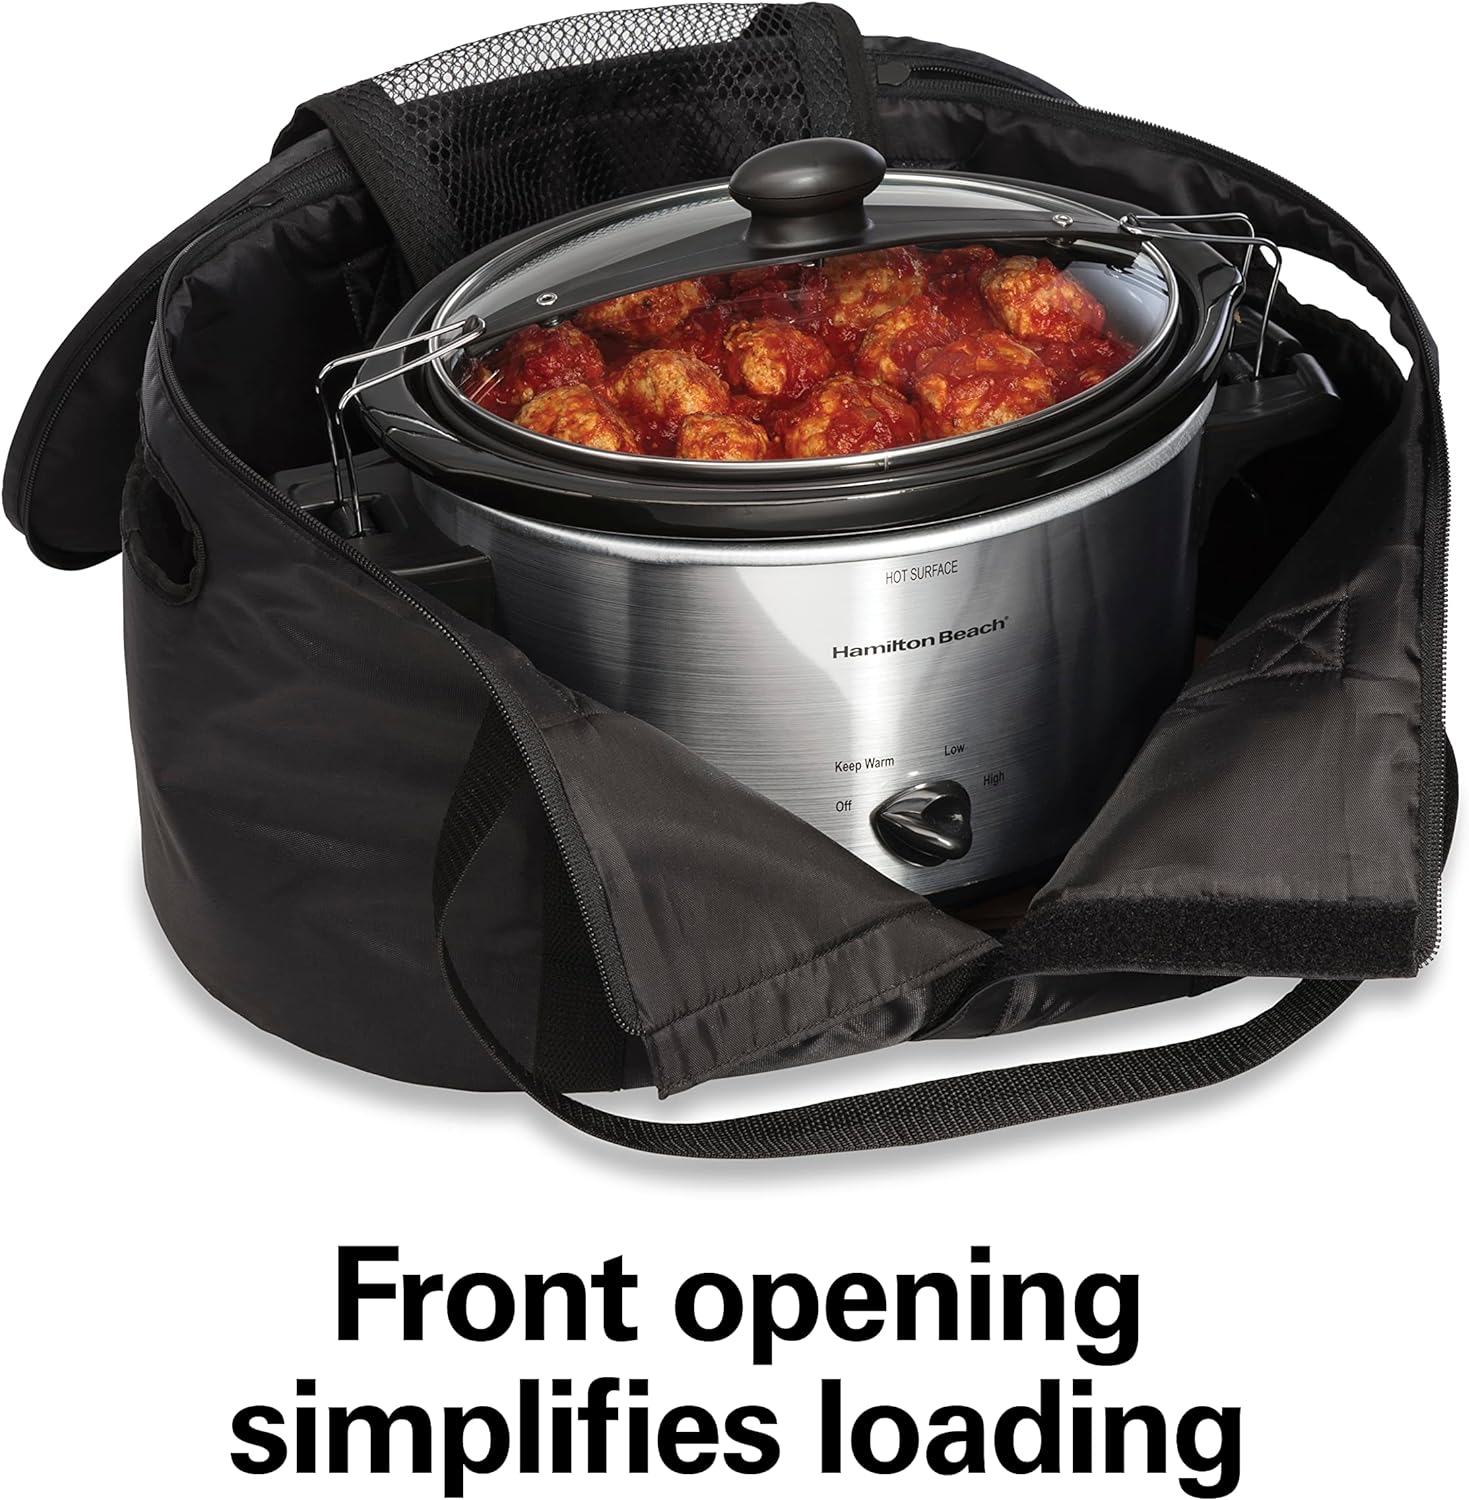 Hamilton Beach Portable Slow Cooker Travel Bag, Insulated Carrier Case for 4, 5, 6, 7  8 Quart Crock, Internal Mesh Net Holds Pot in Place, Compatible with Other Brands, Black (33002)